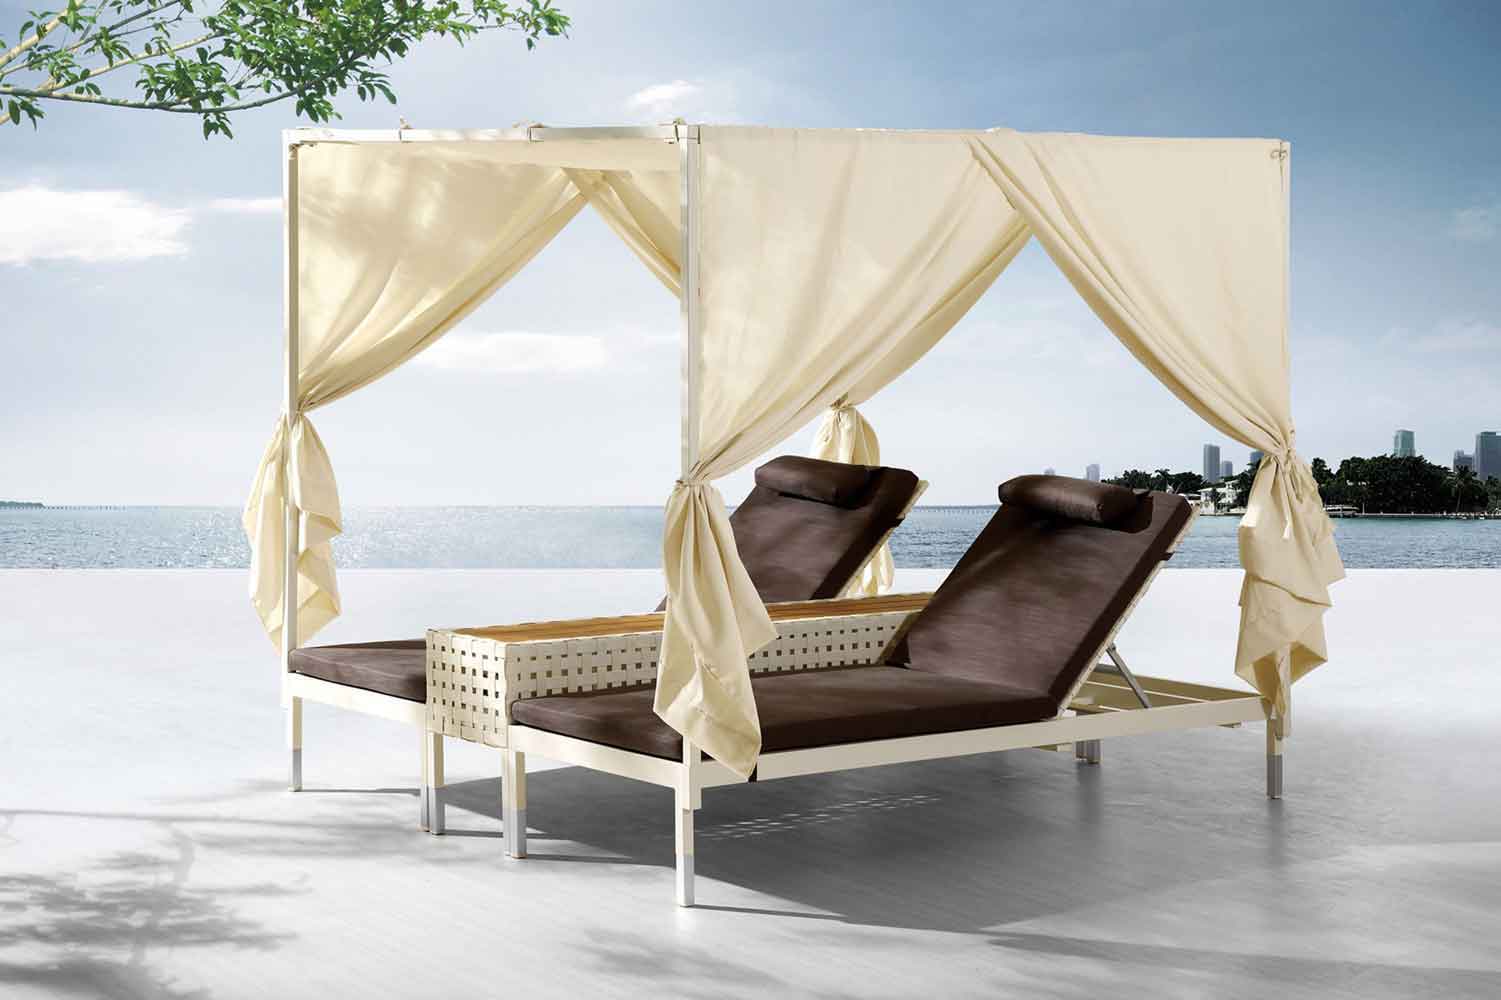 high sunbed for outdoor use, outdoor sunbed, double sunbed with wooden table in the middle, connected double single sunbeds, krevataki exoterikou xorou me kourtina, curtained double sunbed for outdoor use, sunbeds with adjustable back, rithmizomeni raxi k